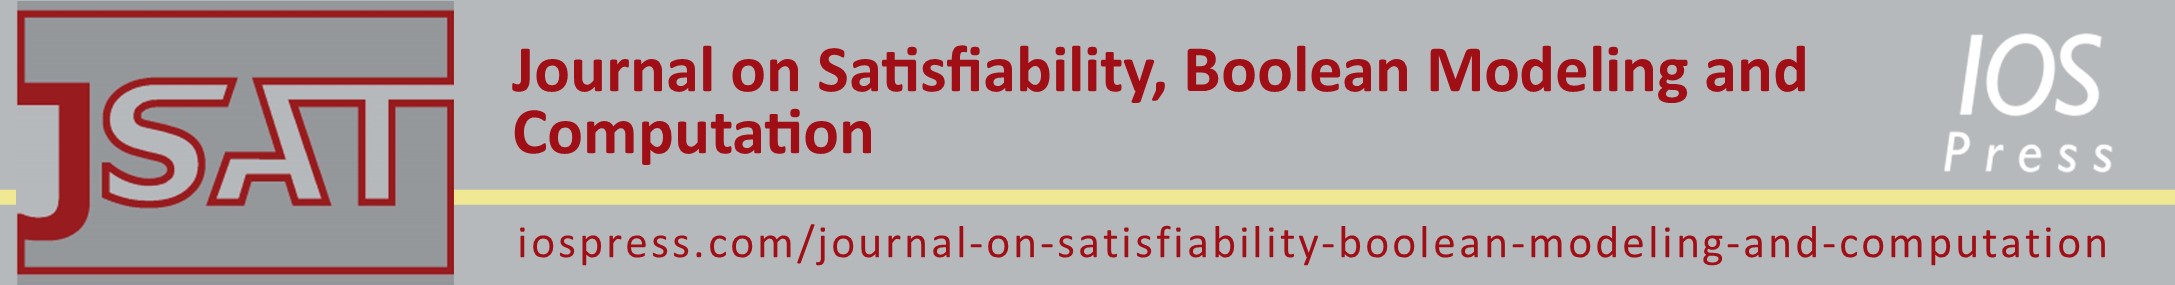 Journal on Satisfiability, Boolean Modeling and Computation